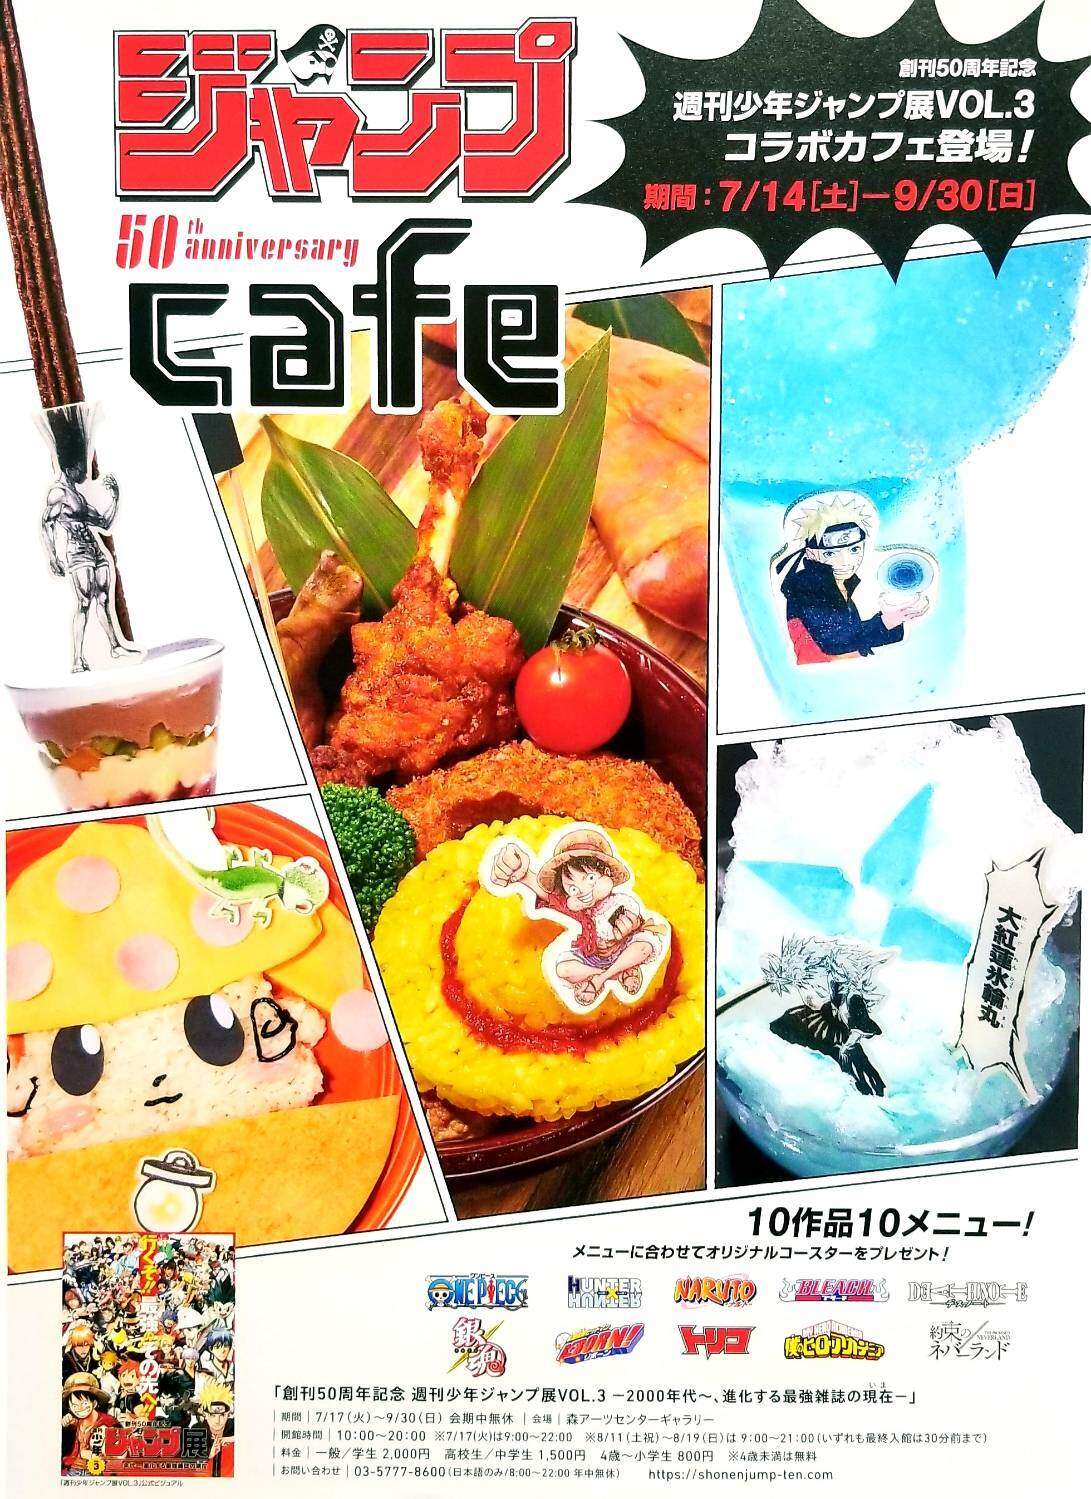 JUMP 50TH ANNIVERSARY CAFE FLYER